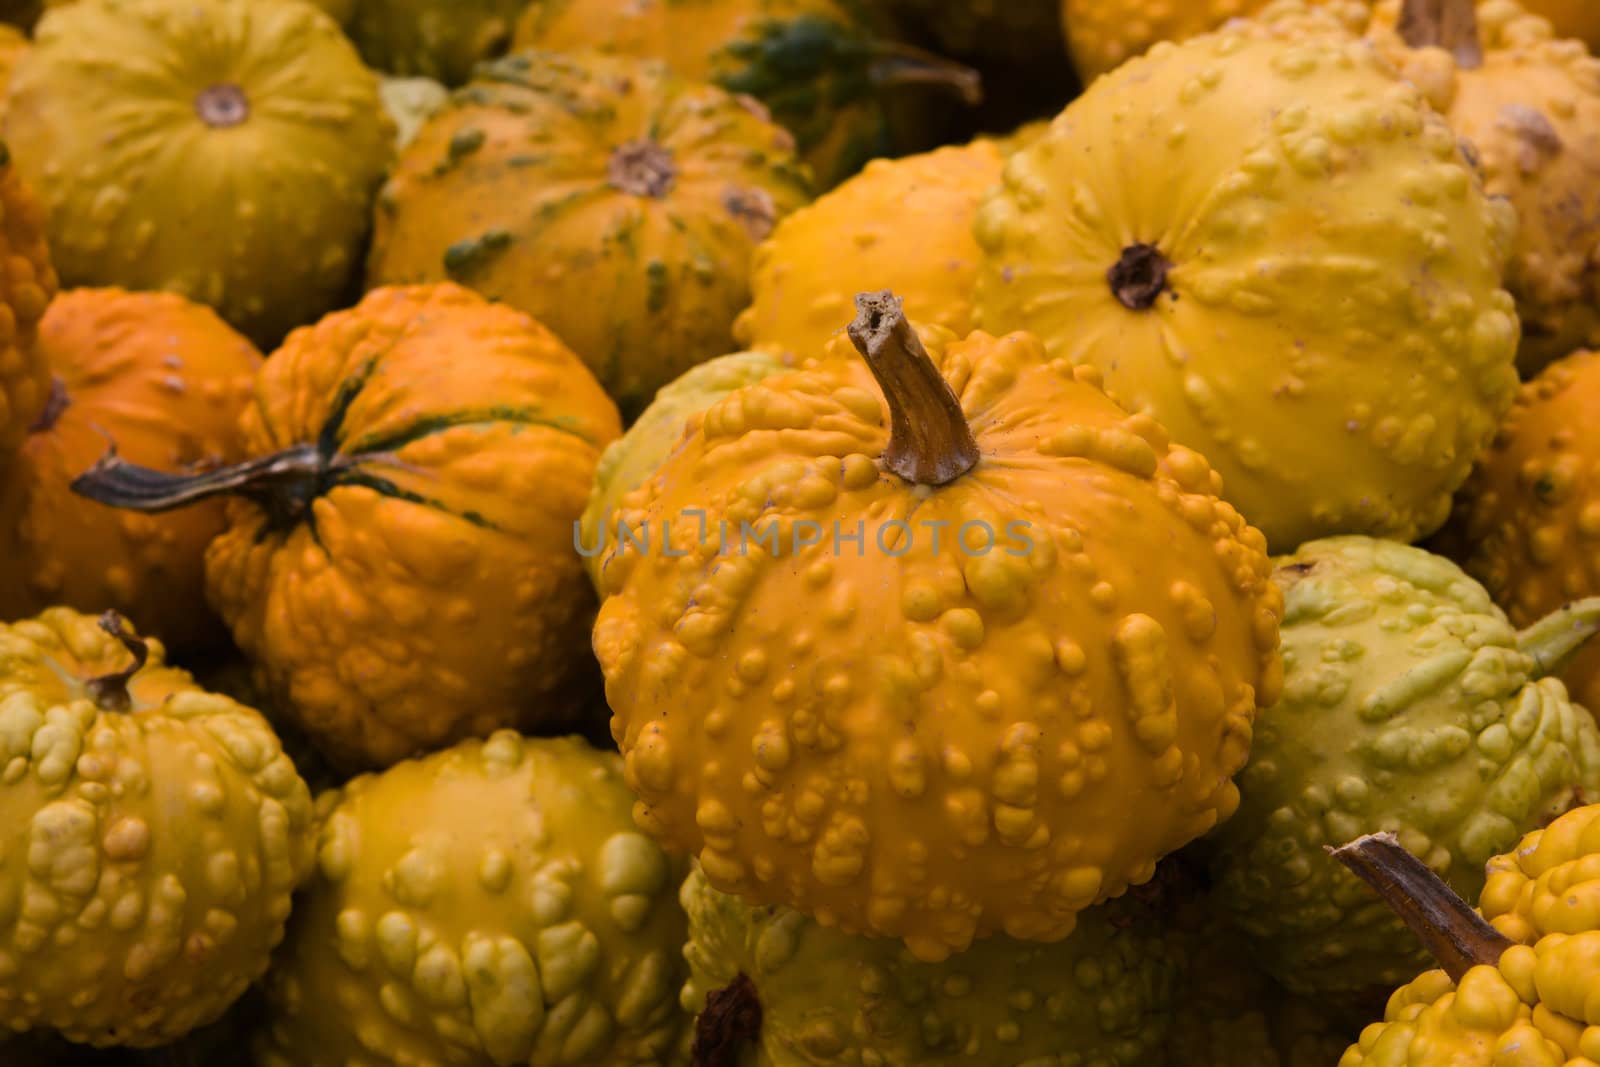 A pile of Gourds during the fall season.